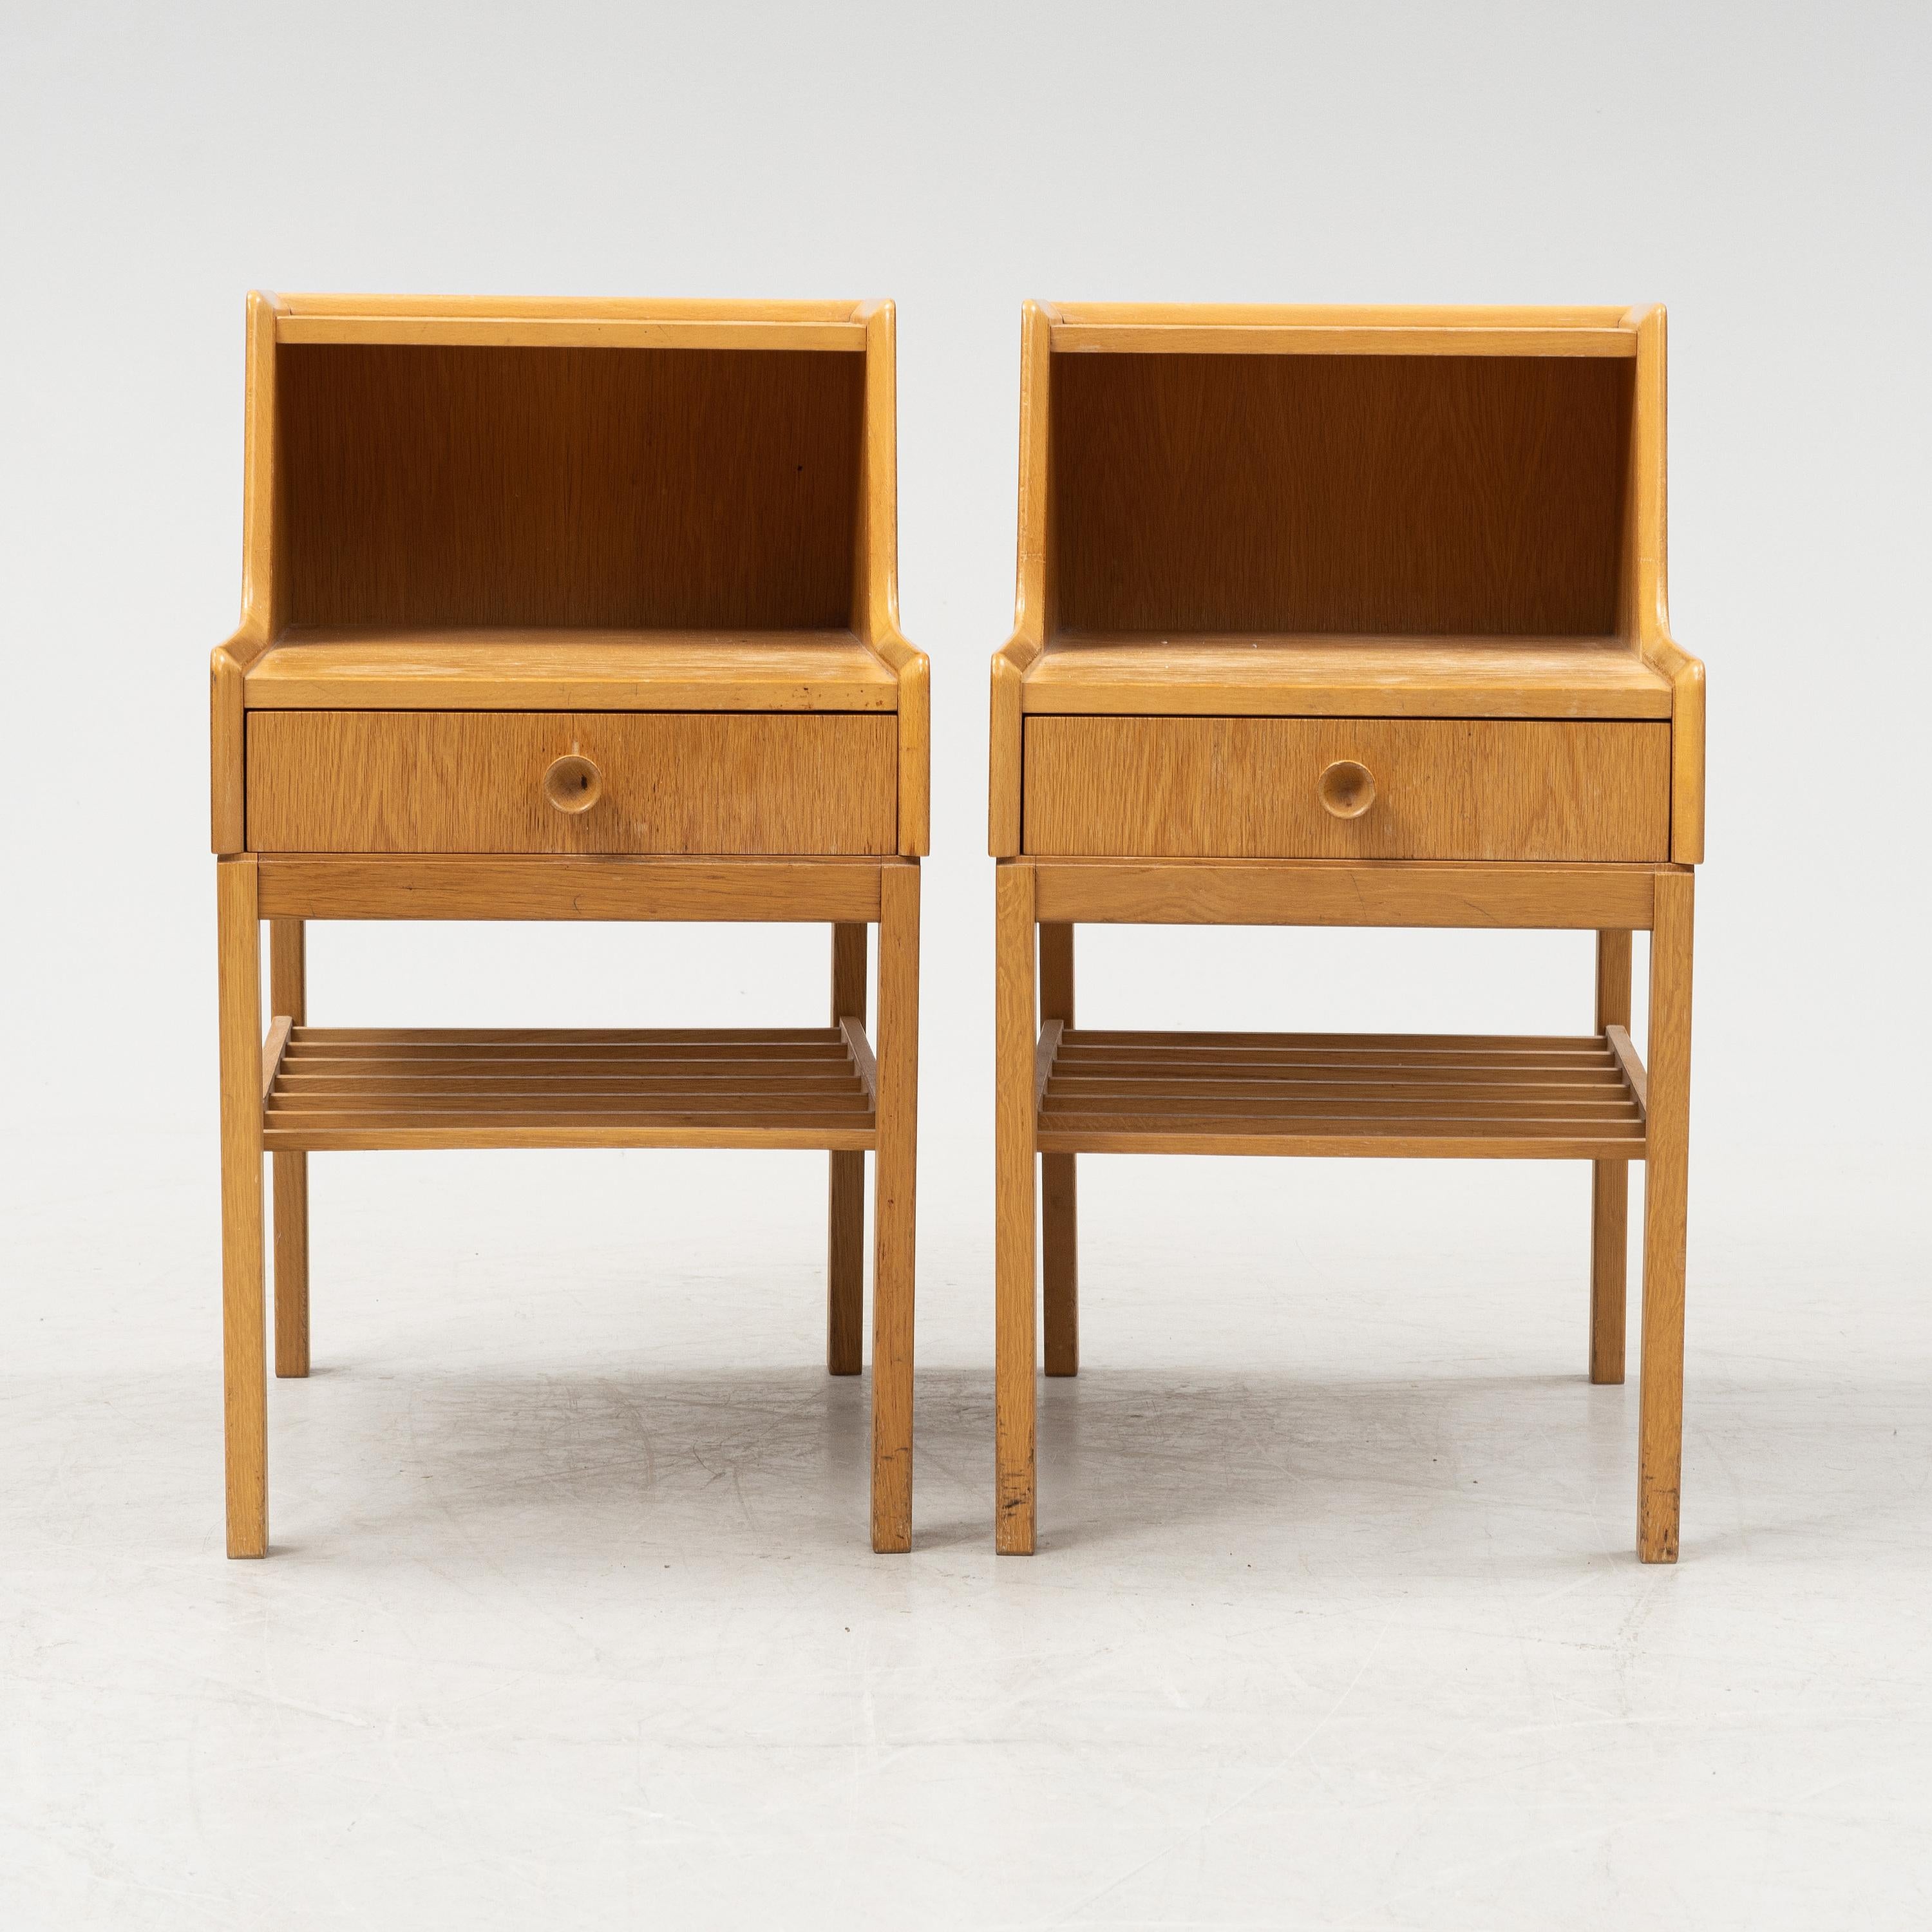 Swedish Oak Bedside Table a Pair Anonymous, Sweden, 1960 For Sale